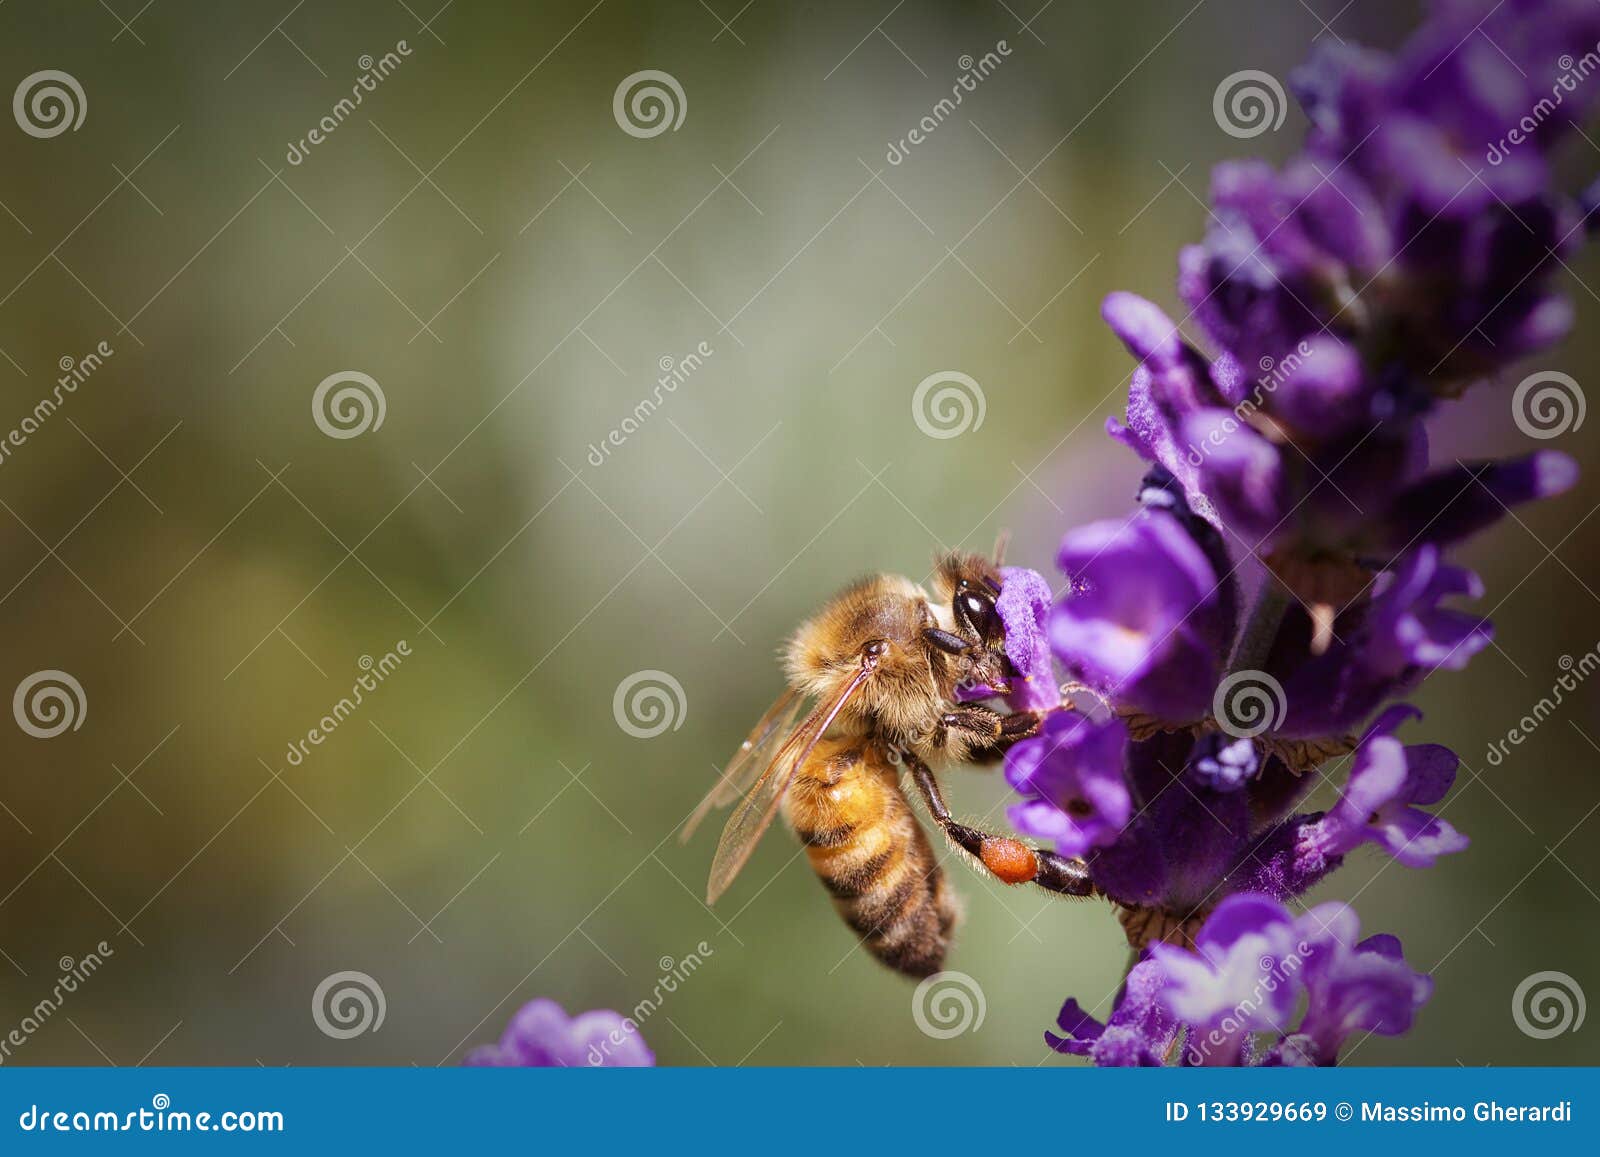 honey bee pollinating a lavender flower